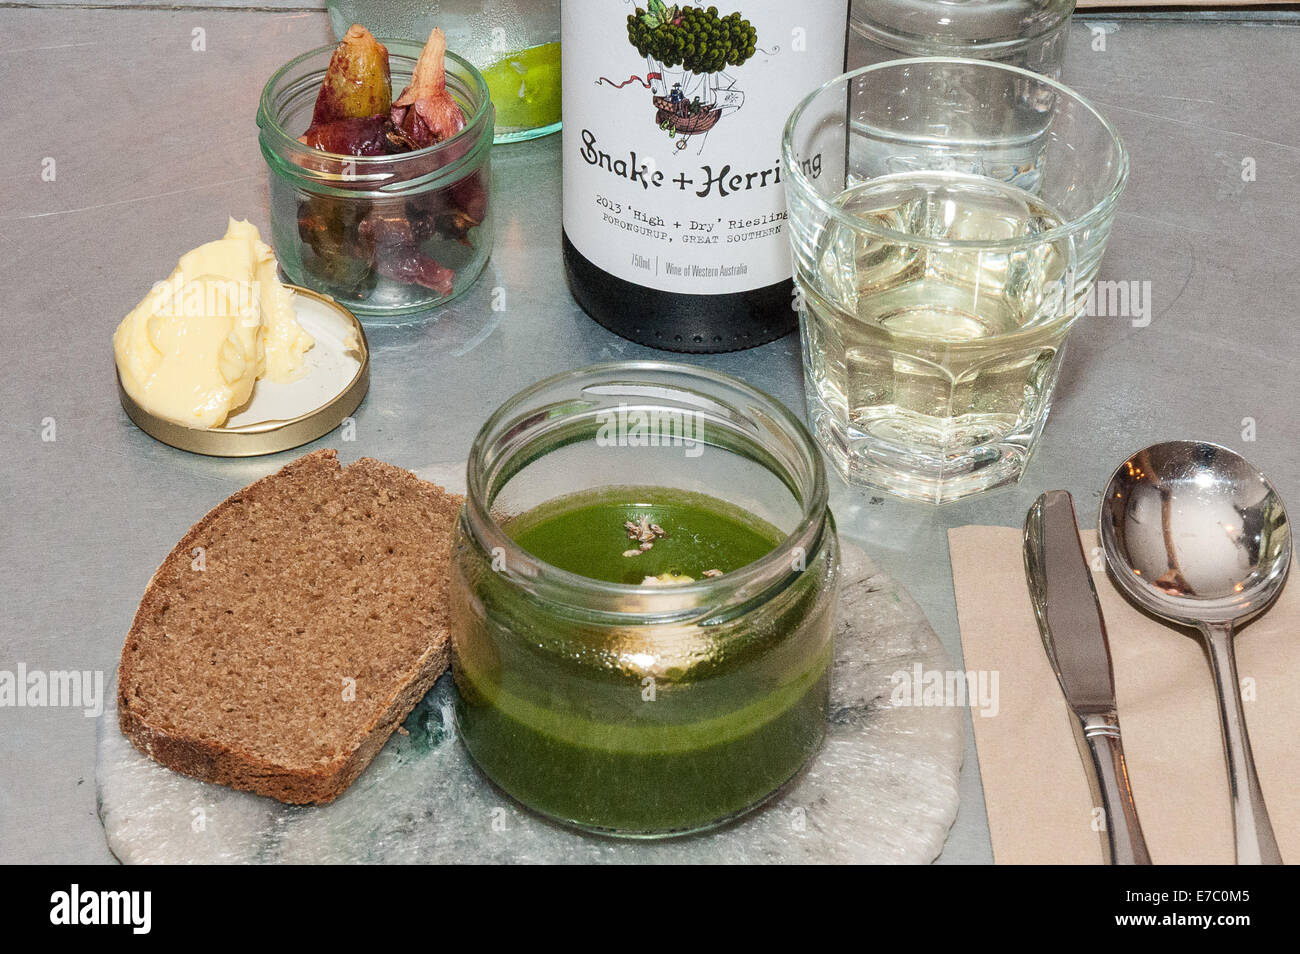 Brighton, UK. 12th Sep, 2014. Nettle soup, horseradish, mugwort accompanied by Snake and Herring High Dry Riesling, 2013. Brighton & Hove Food and Drink Festival presents A Taste of Western Australia at Silo. Australian influenced Chef Douglas McMaster and Australian chef Matt Stone serve a meal in conjunction with wines from Western Australia at the innovative new restaurant Silo. Credit:  Julia Claxton/Alamy Live News Stock Photo